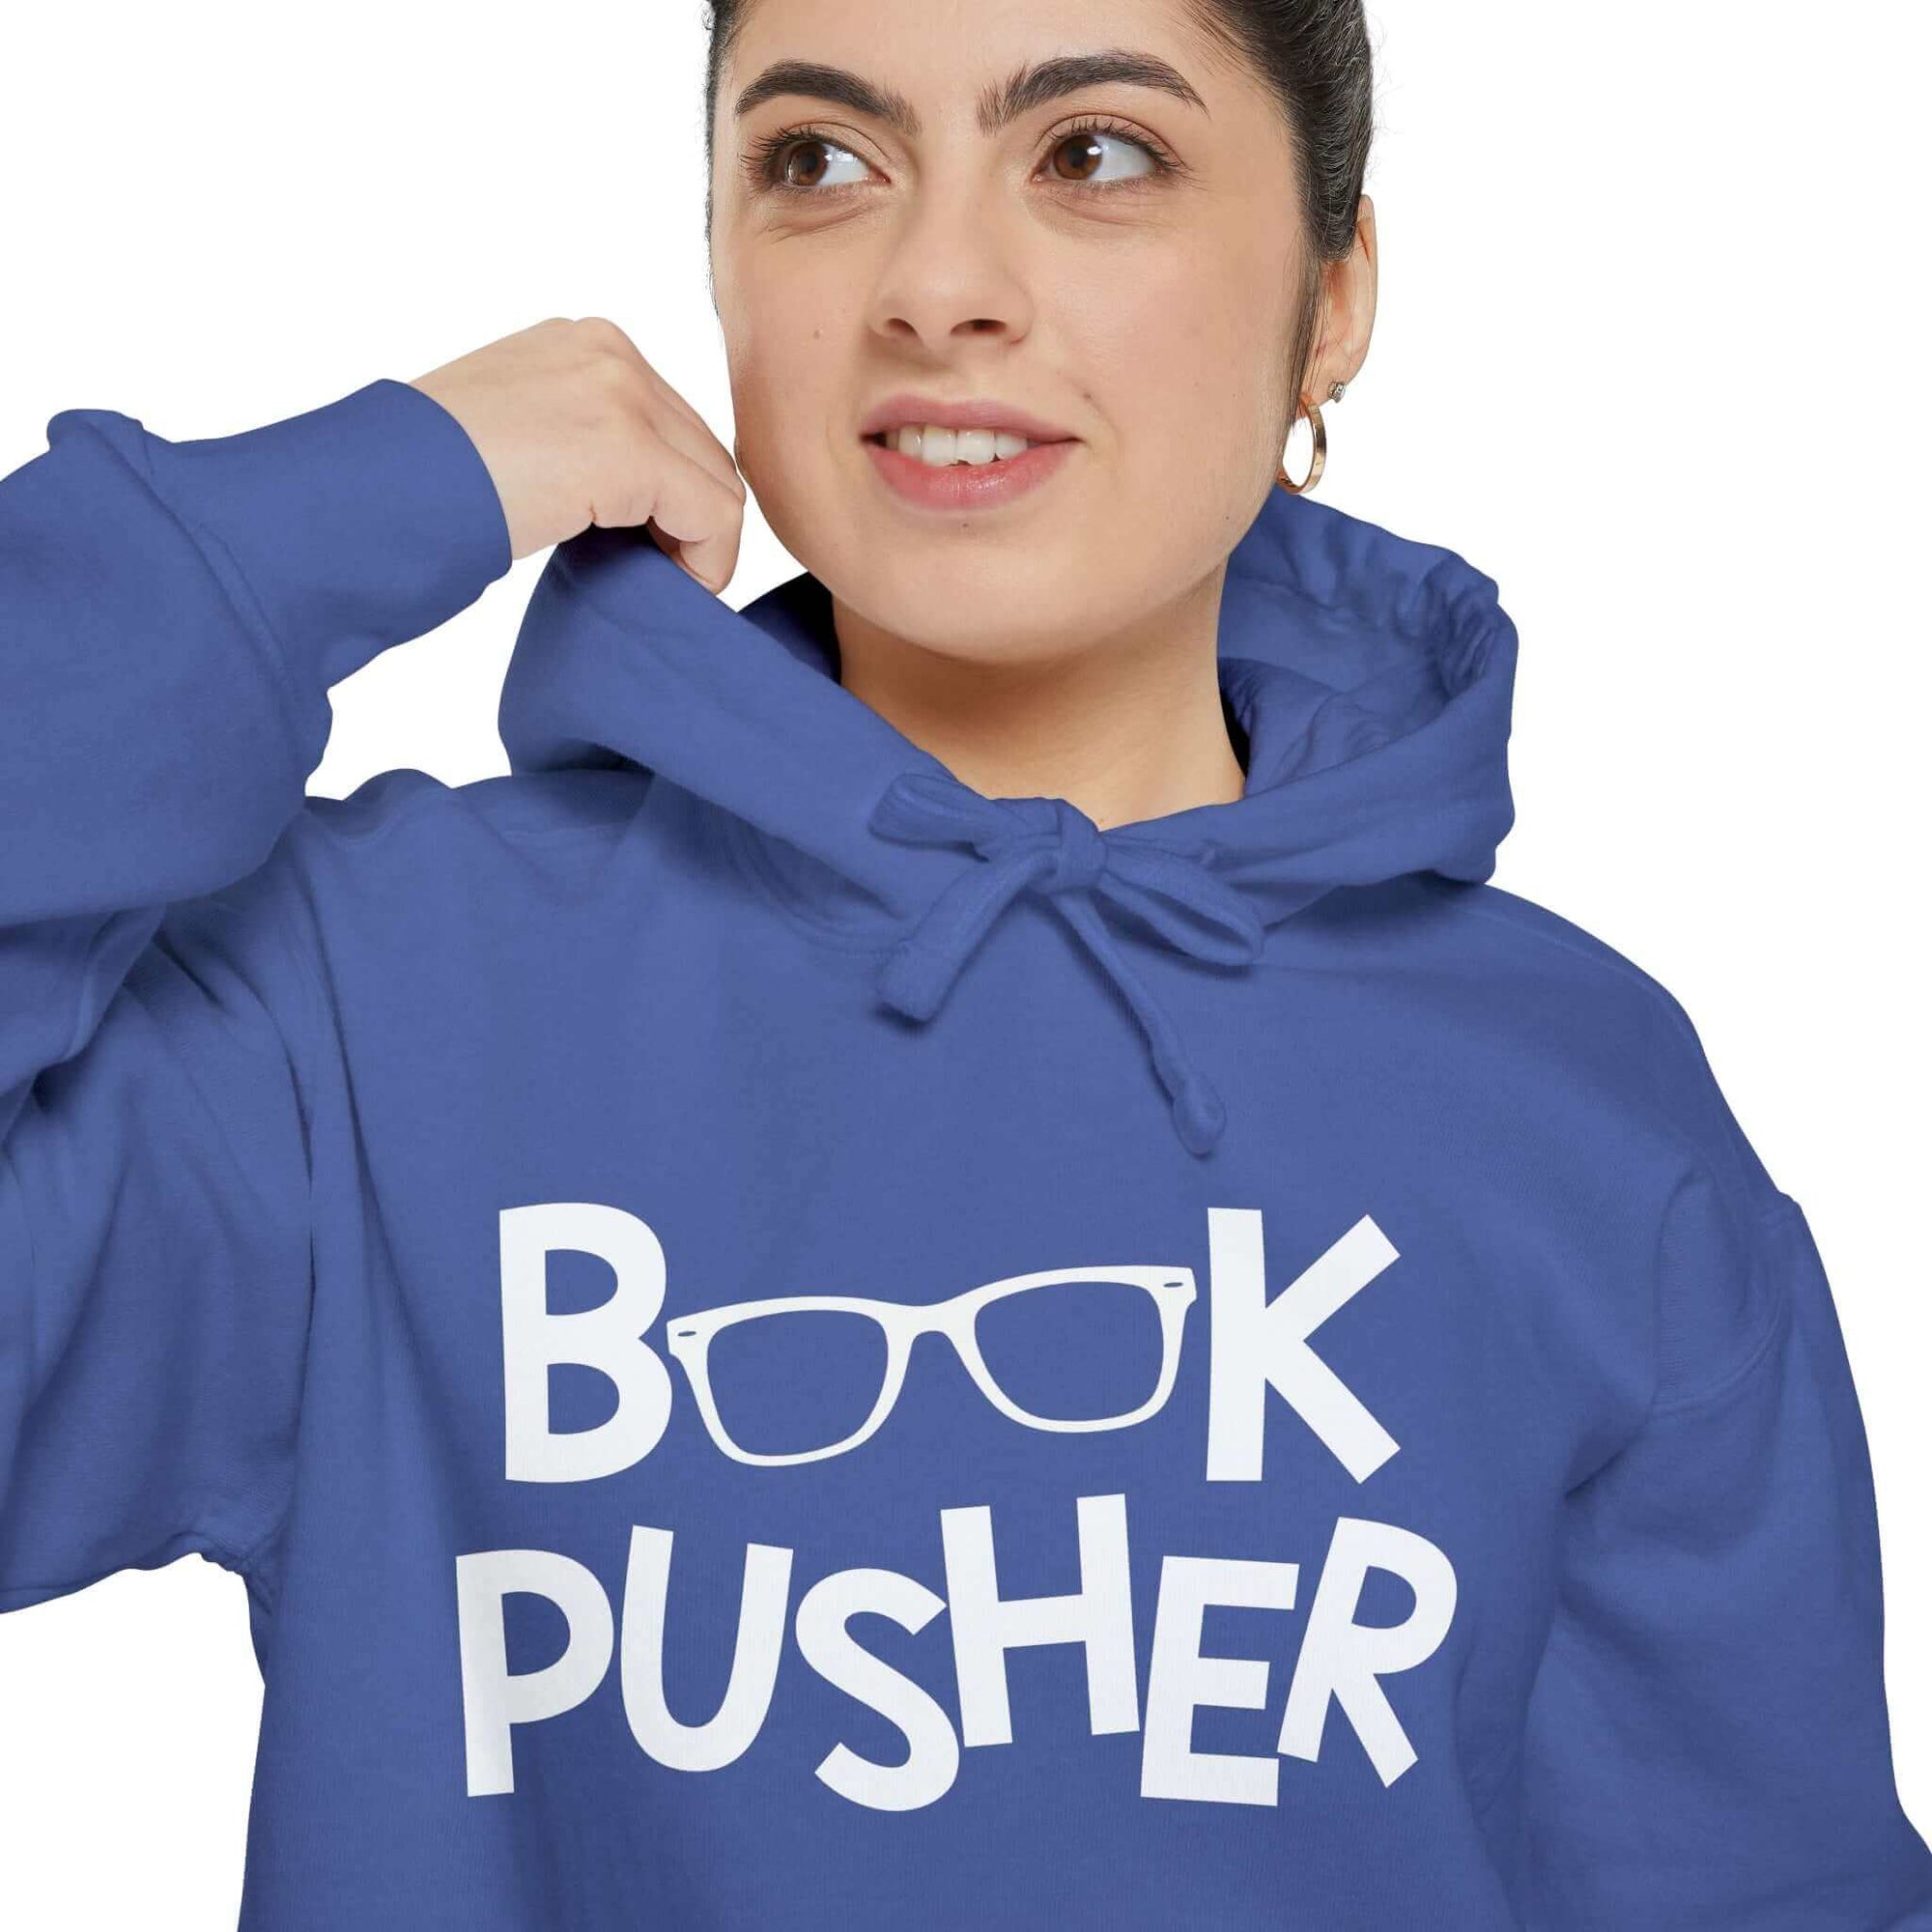 Book Pusher Unisex Garment-Dyed Hoodie